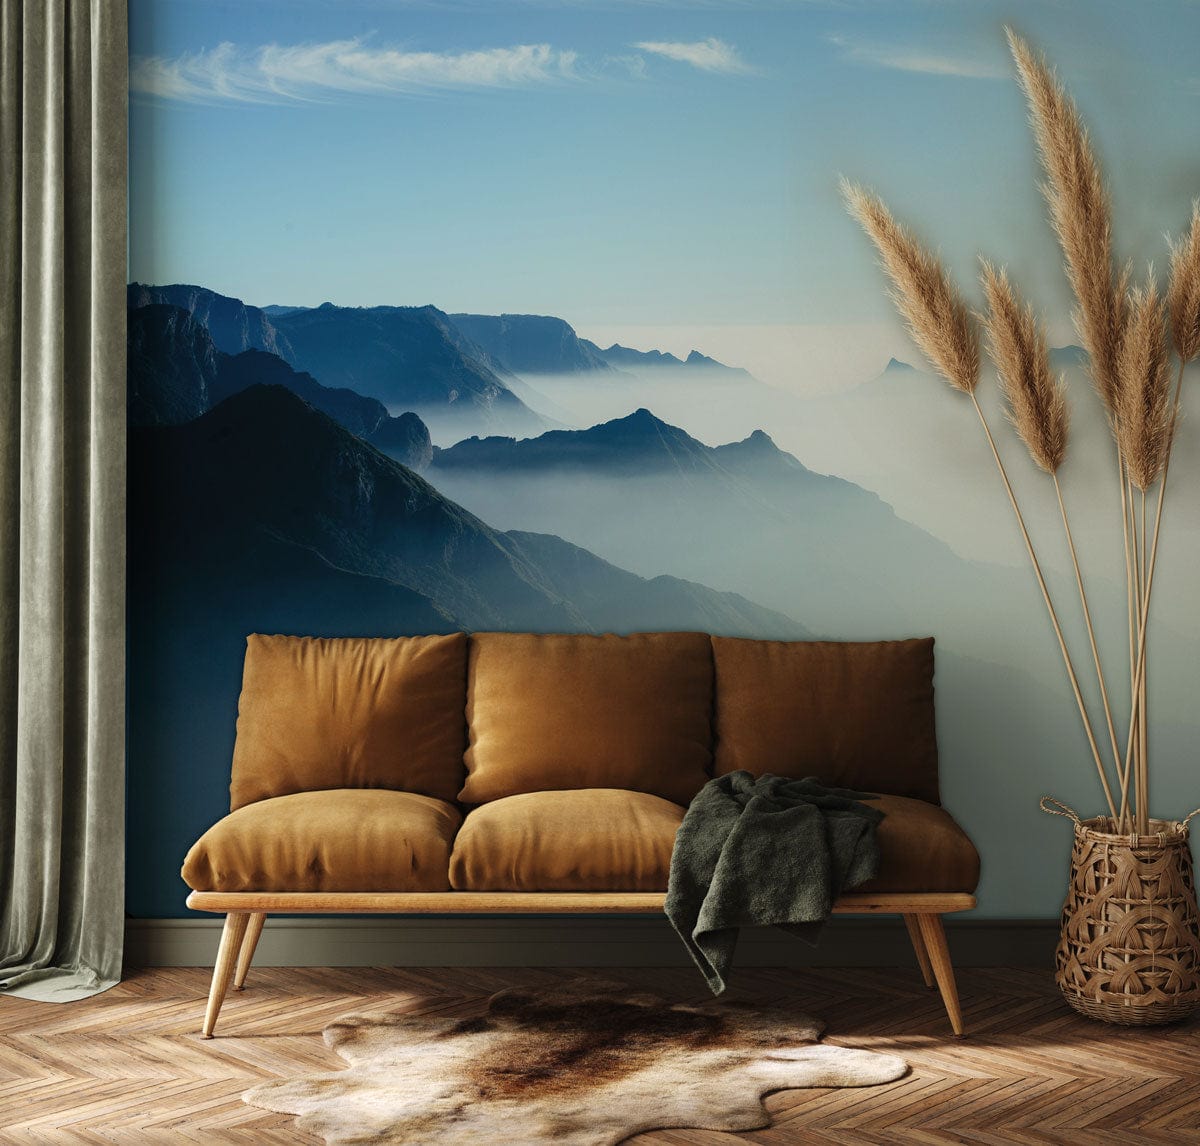 Wallpaper mural featuring a landscape depicting a sea of clouds at peak, ideal for use in the hallway.